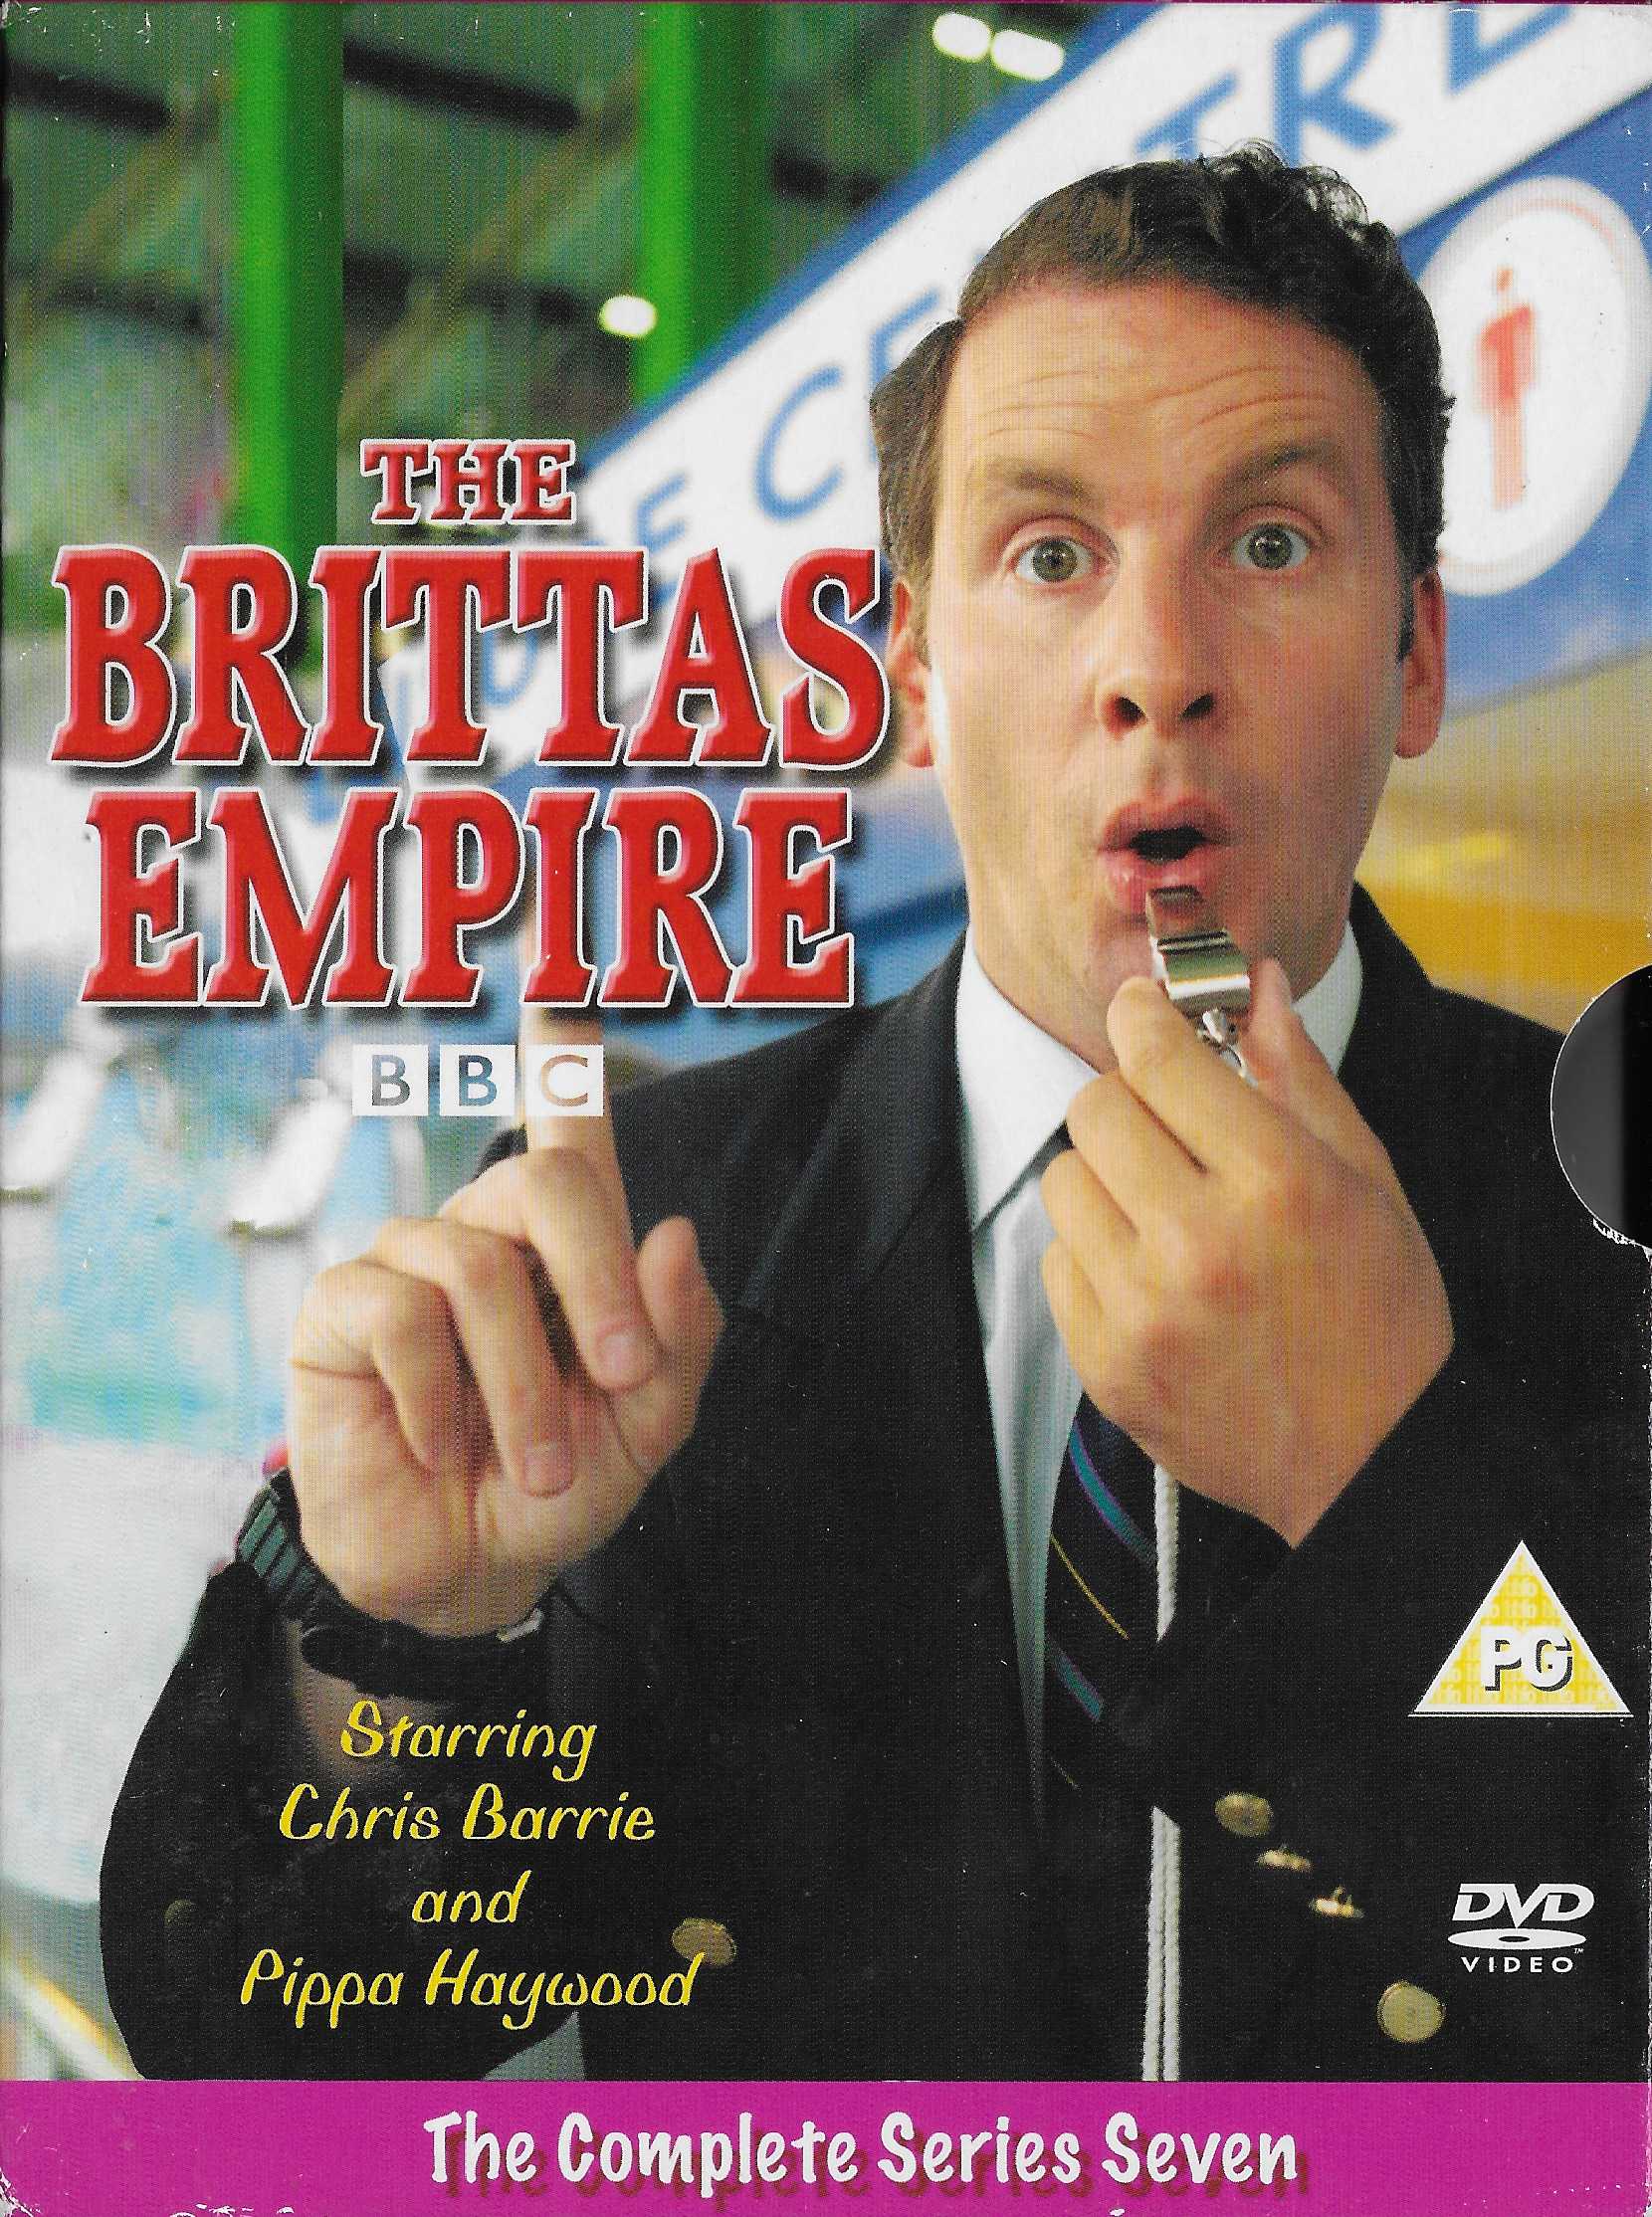 Picture of The Brittas empire - Series 7 by artist Ian Davidson / Peter Vincent / Tony Millan / Mike Walling / Terry Kyan / Paul Smith from the BBC dvds - Records and Tapes library